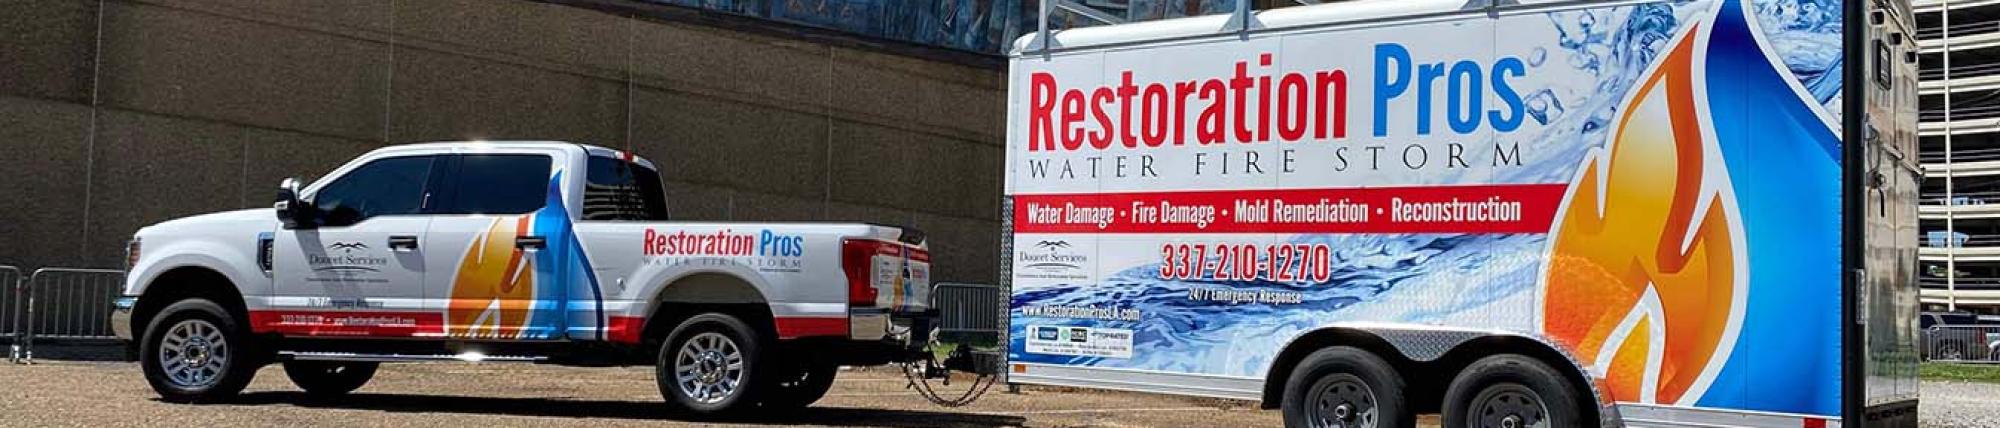 image of water restoration company truck in parking lot